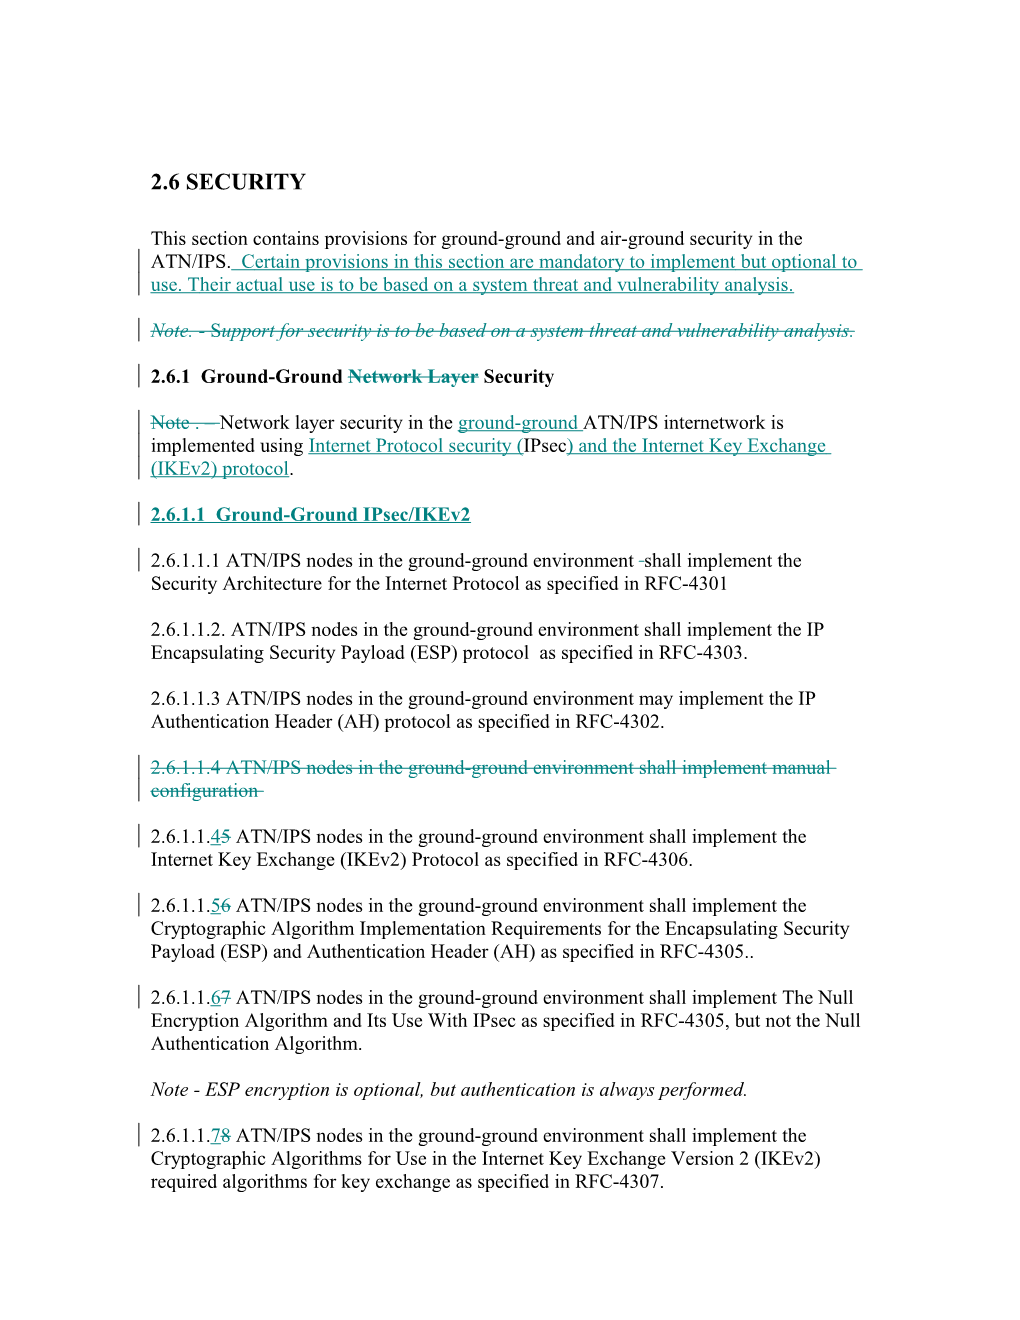 Updated Security Requirements for the Manual for the ATN Using IPS Standards and Protocols